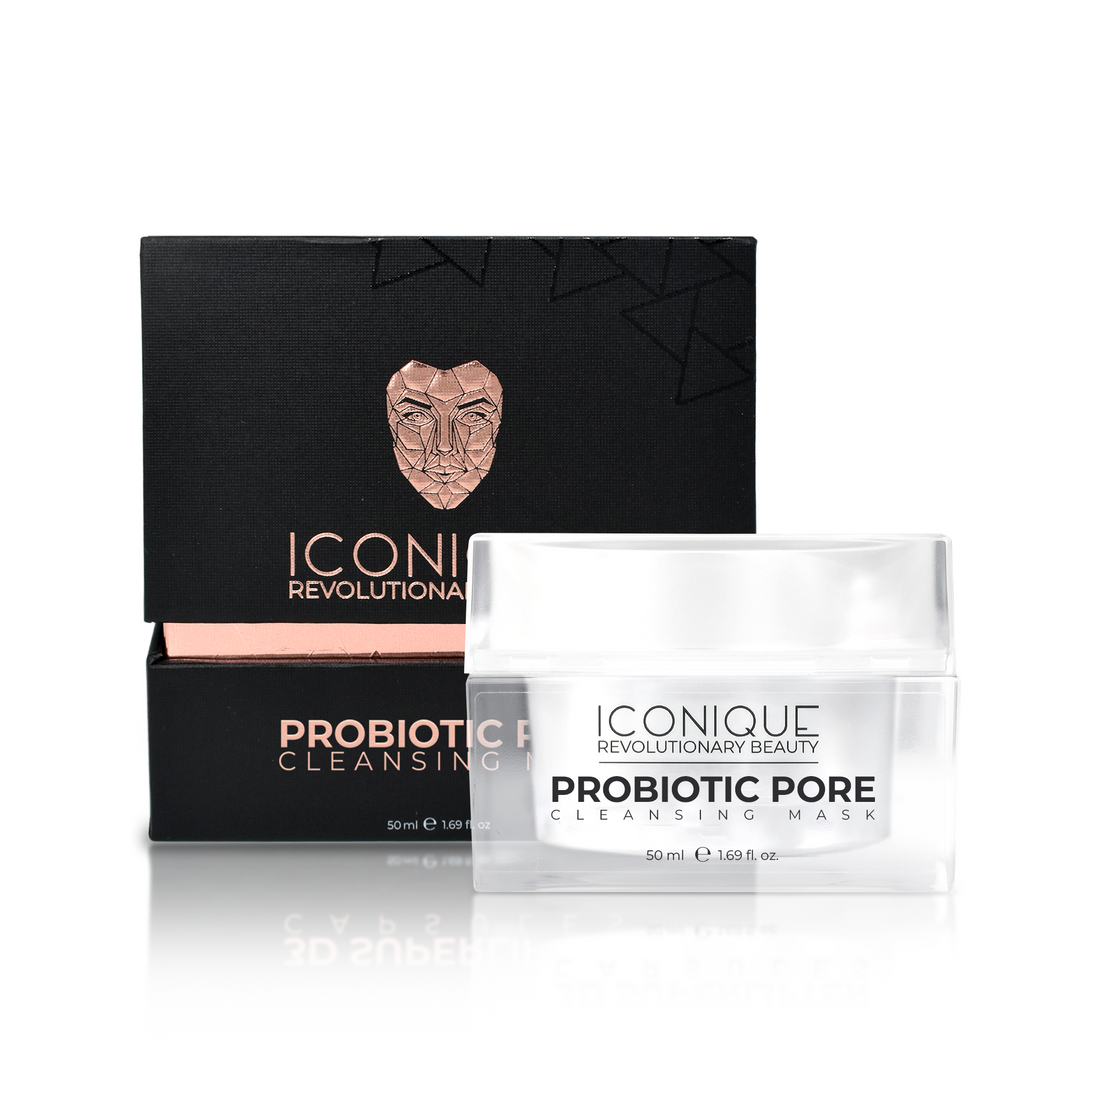 PROBIOTIC PORE CLEANSING MASK